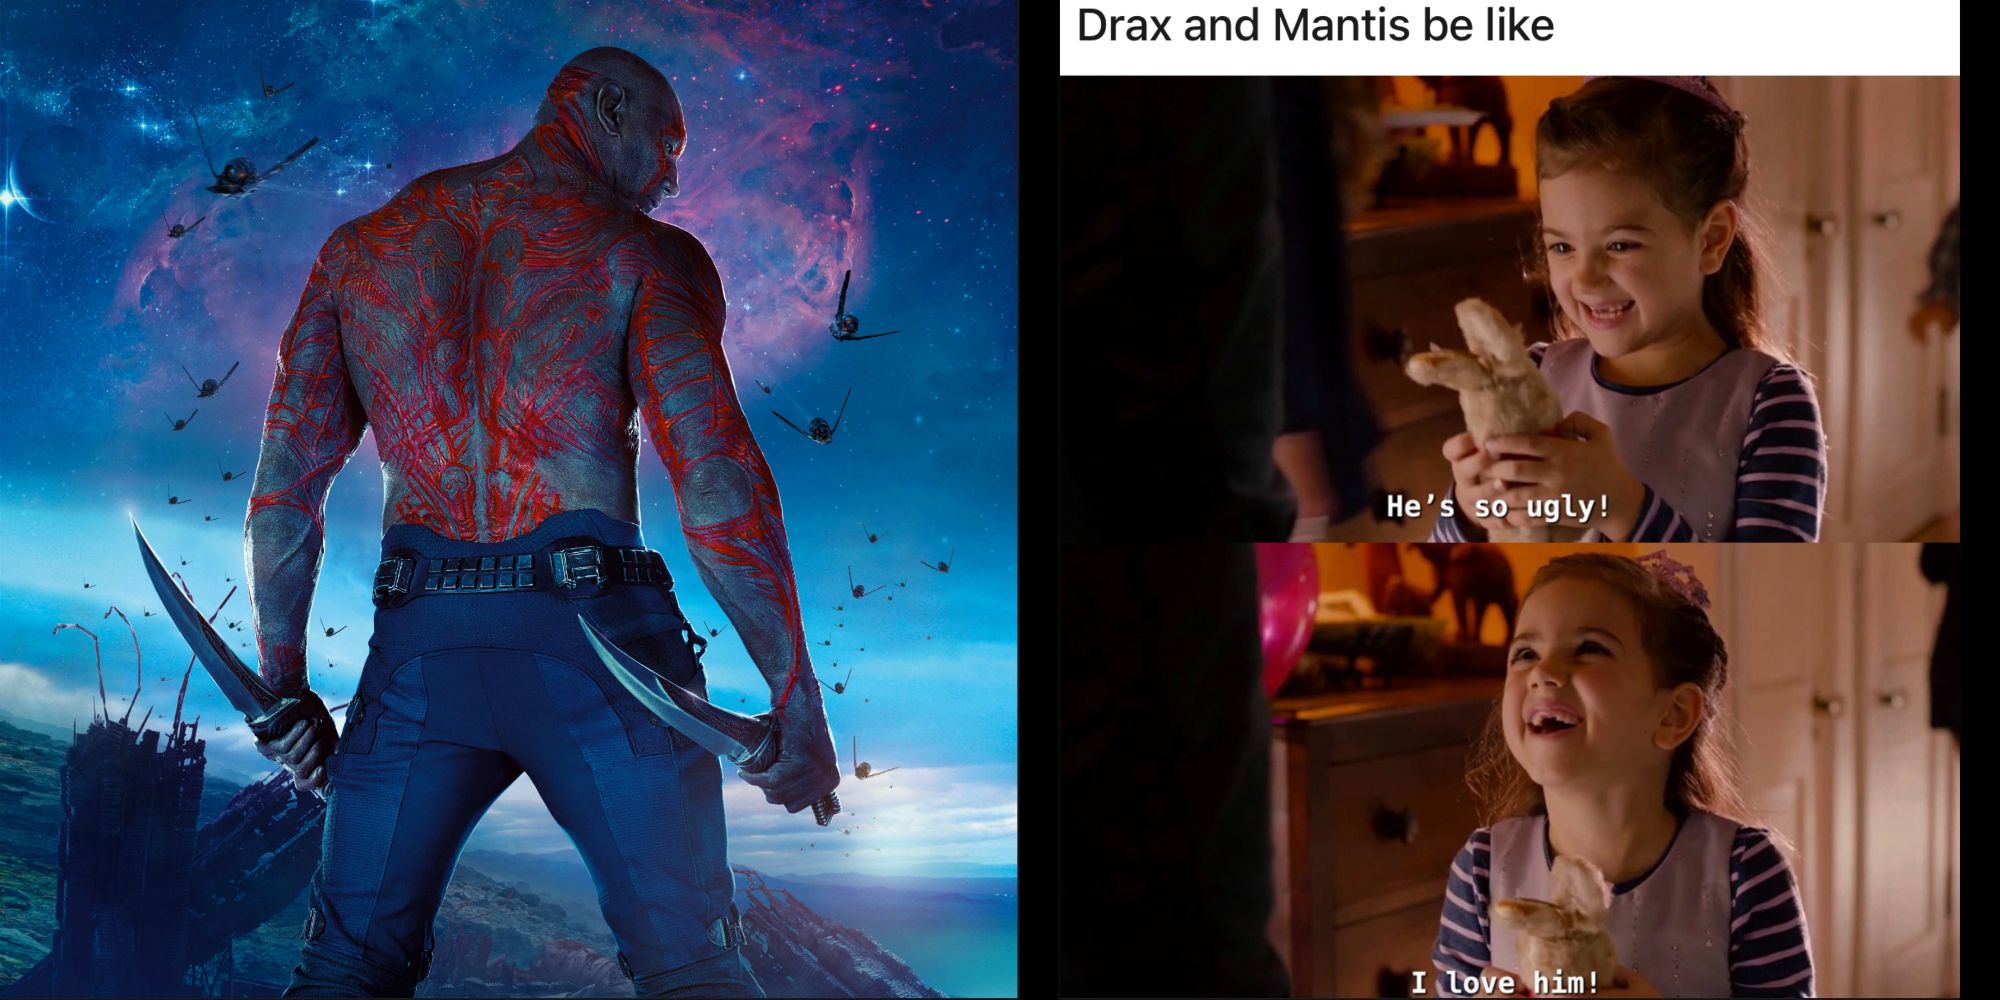 Split Image of Drax and Meme about Drax and Mantis